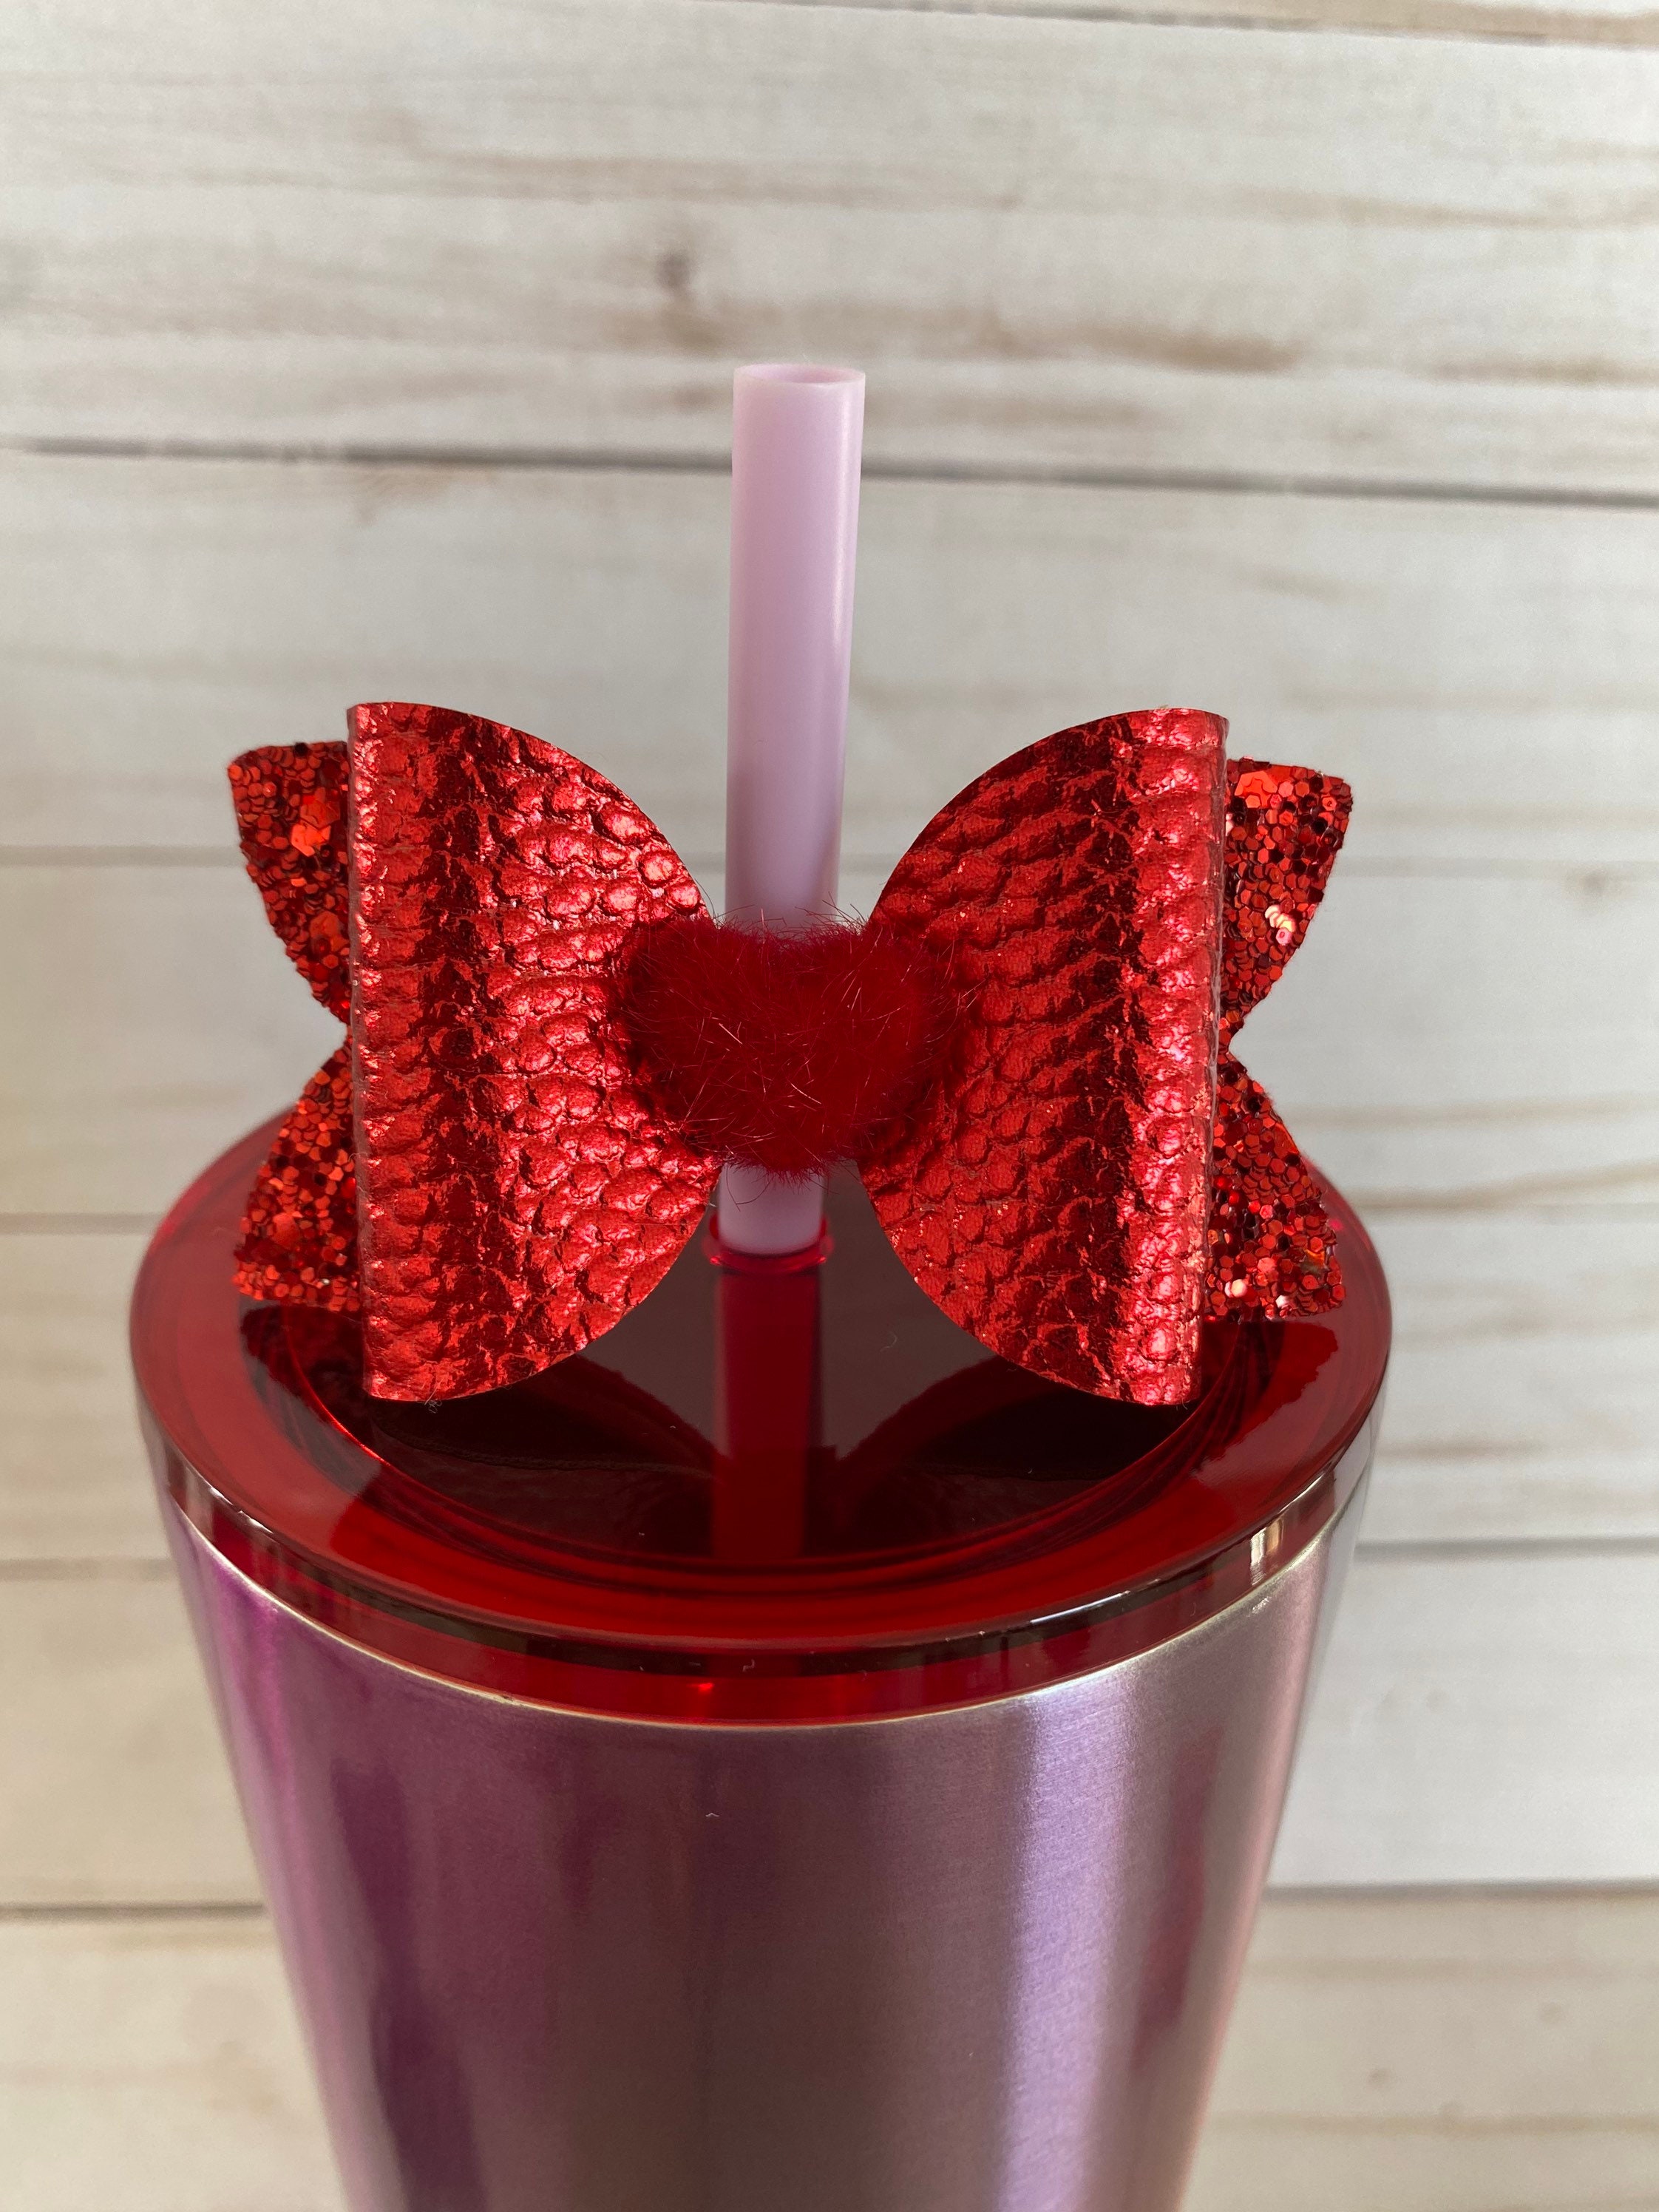 Straw Topper, Red Straw Bow Topper, Valentines Straw Bow Topper, Starbucks  Straw Topper, Bows for Straws, Bows for Starbucks Cups